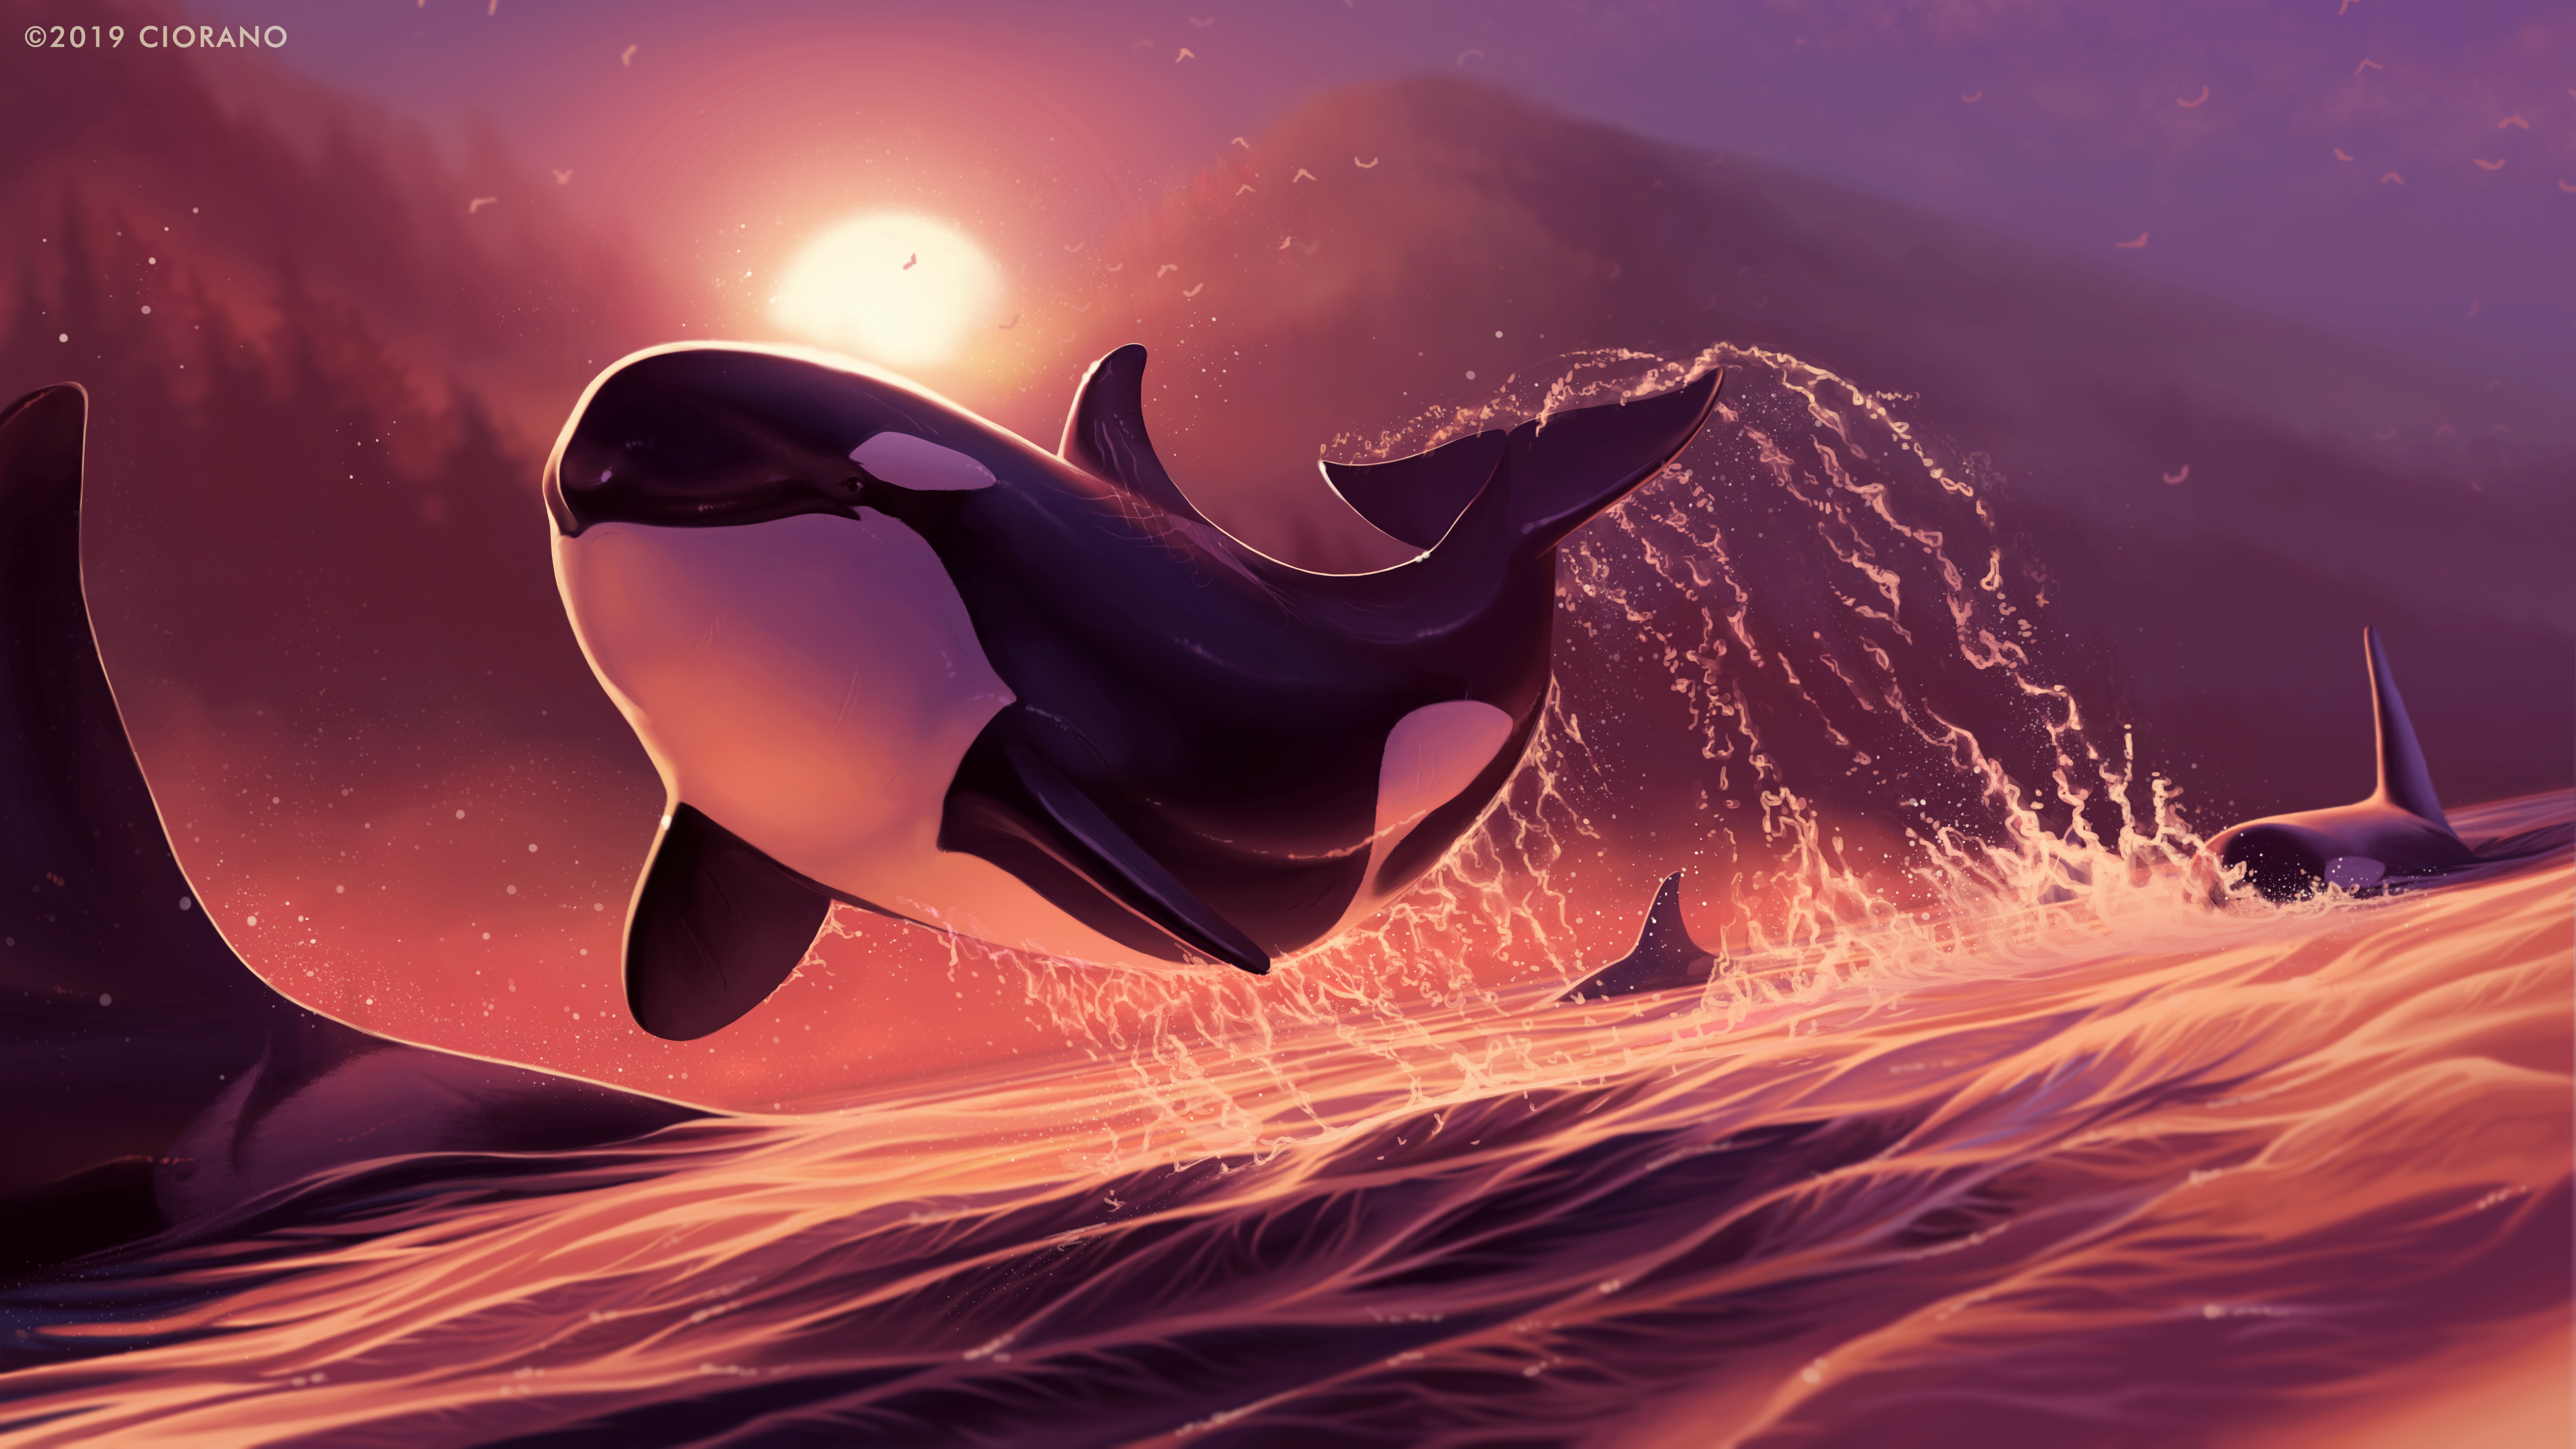 General 5250x2953 digital art artwork illustration drawing digital painting water sea animals whale orca dolphin nature landscape Sun sun rays sunset dusk mountains